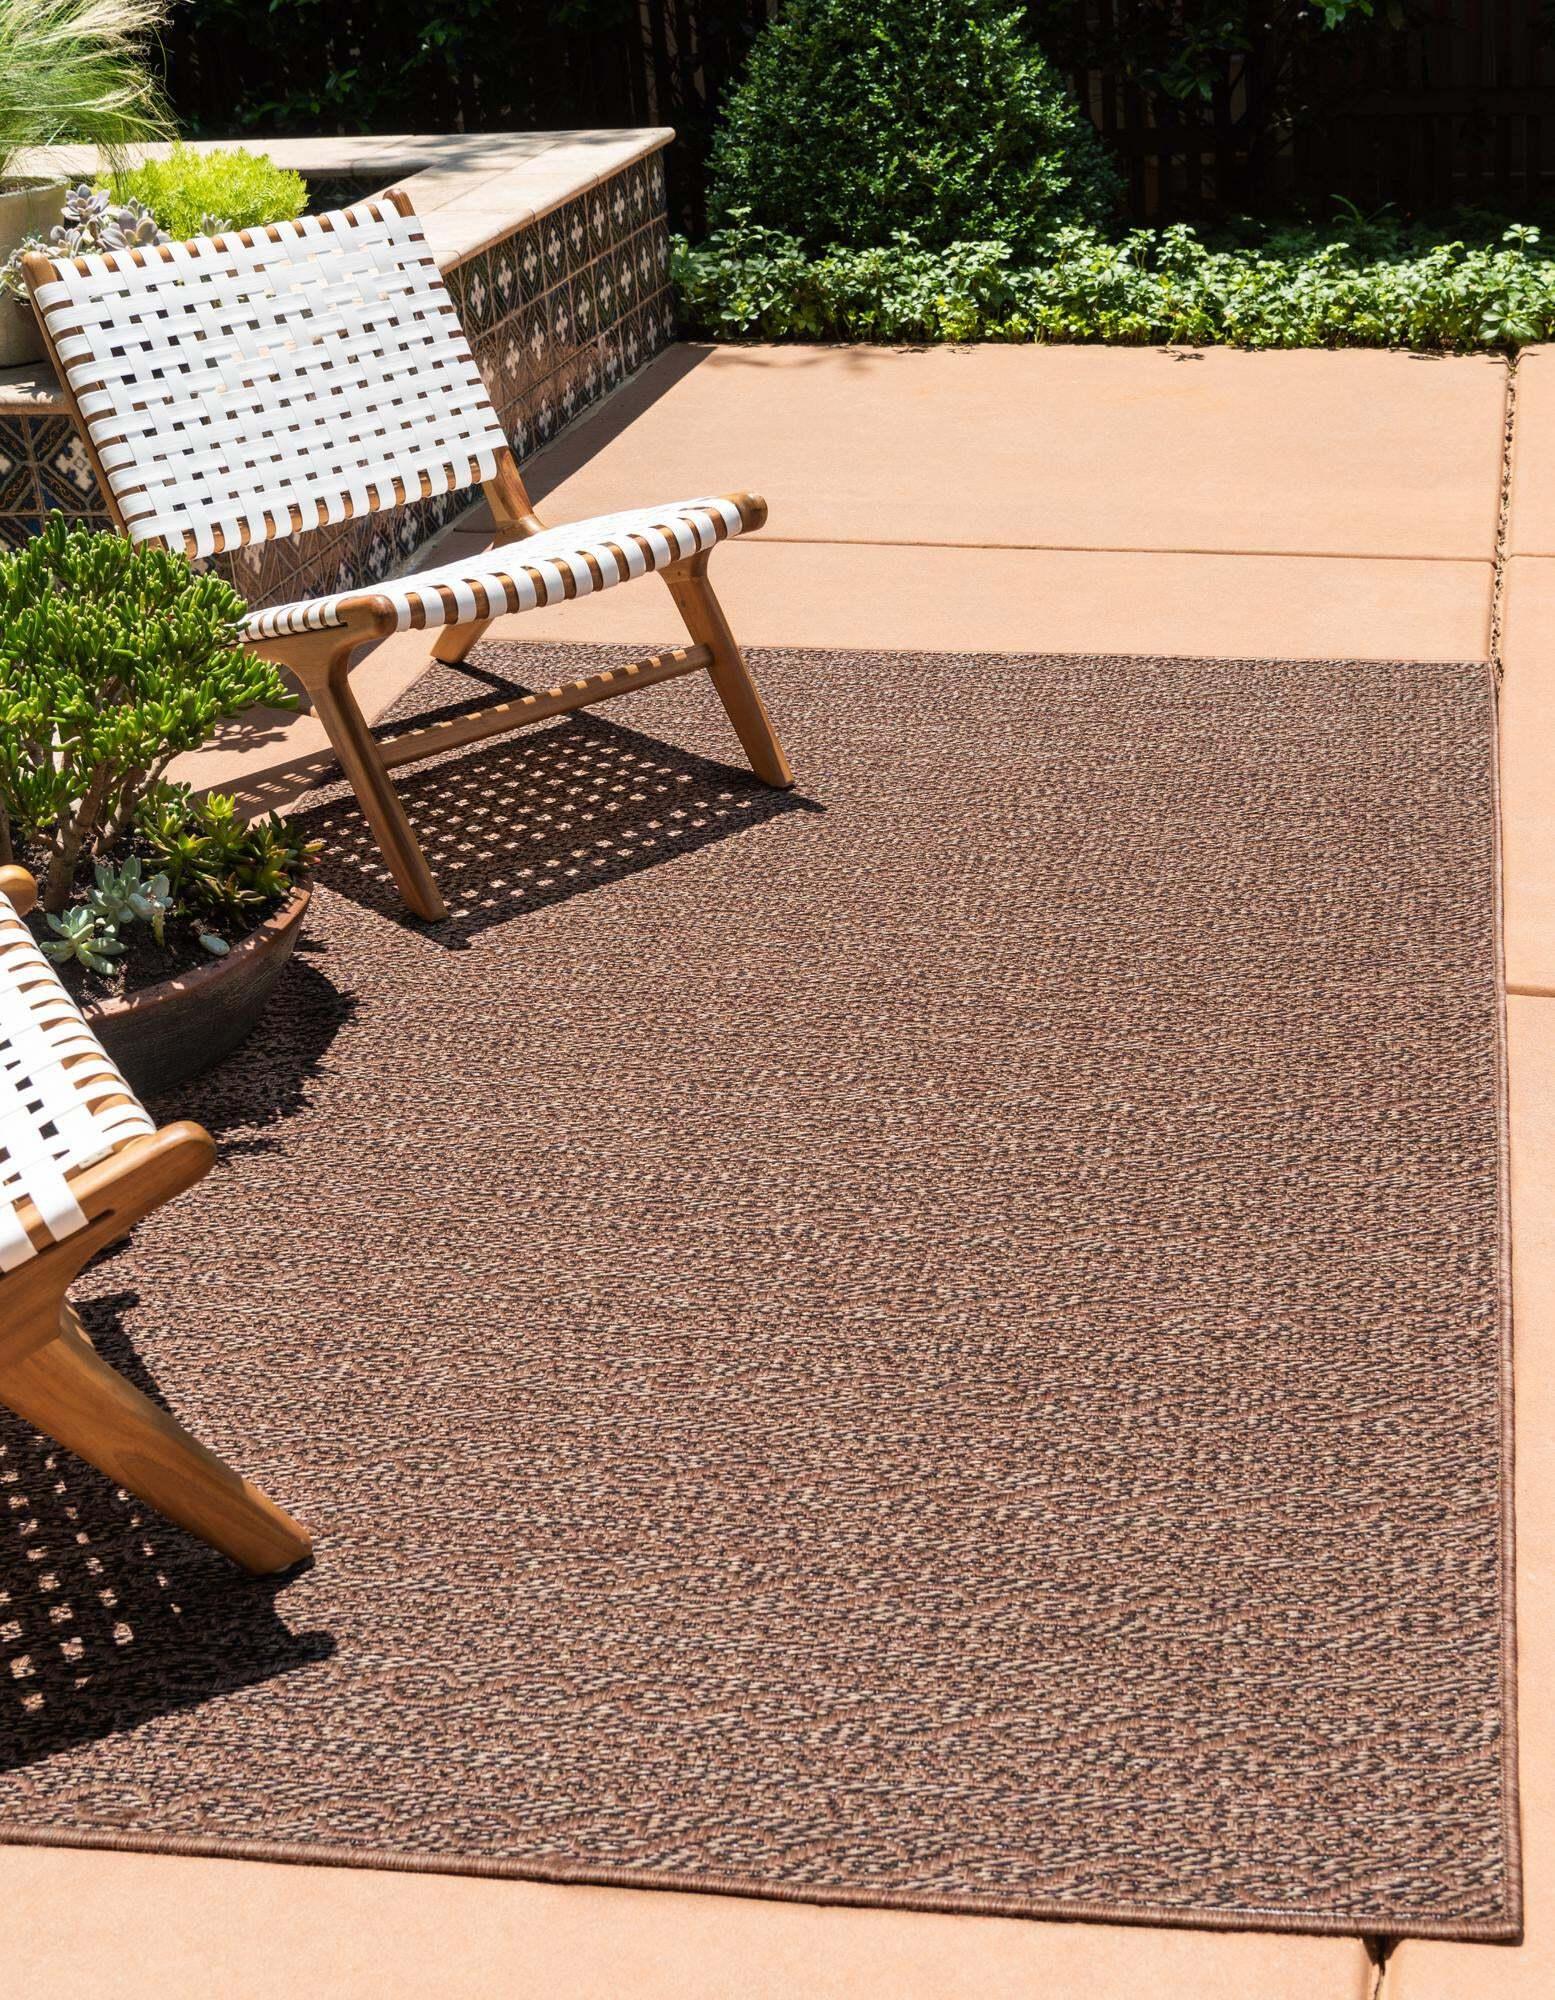 Unique Loom Outdoor Rugs - Outdoor Modern Striped Rectangular 8x11 Rug Brown & Black